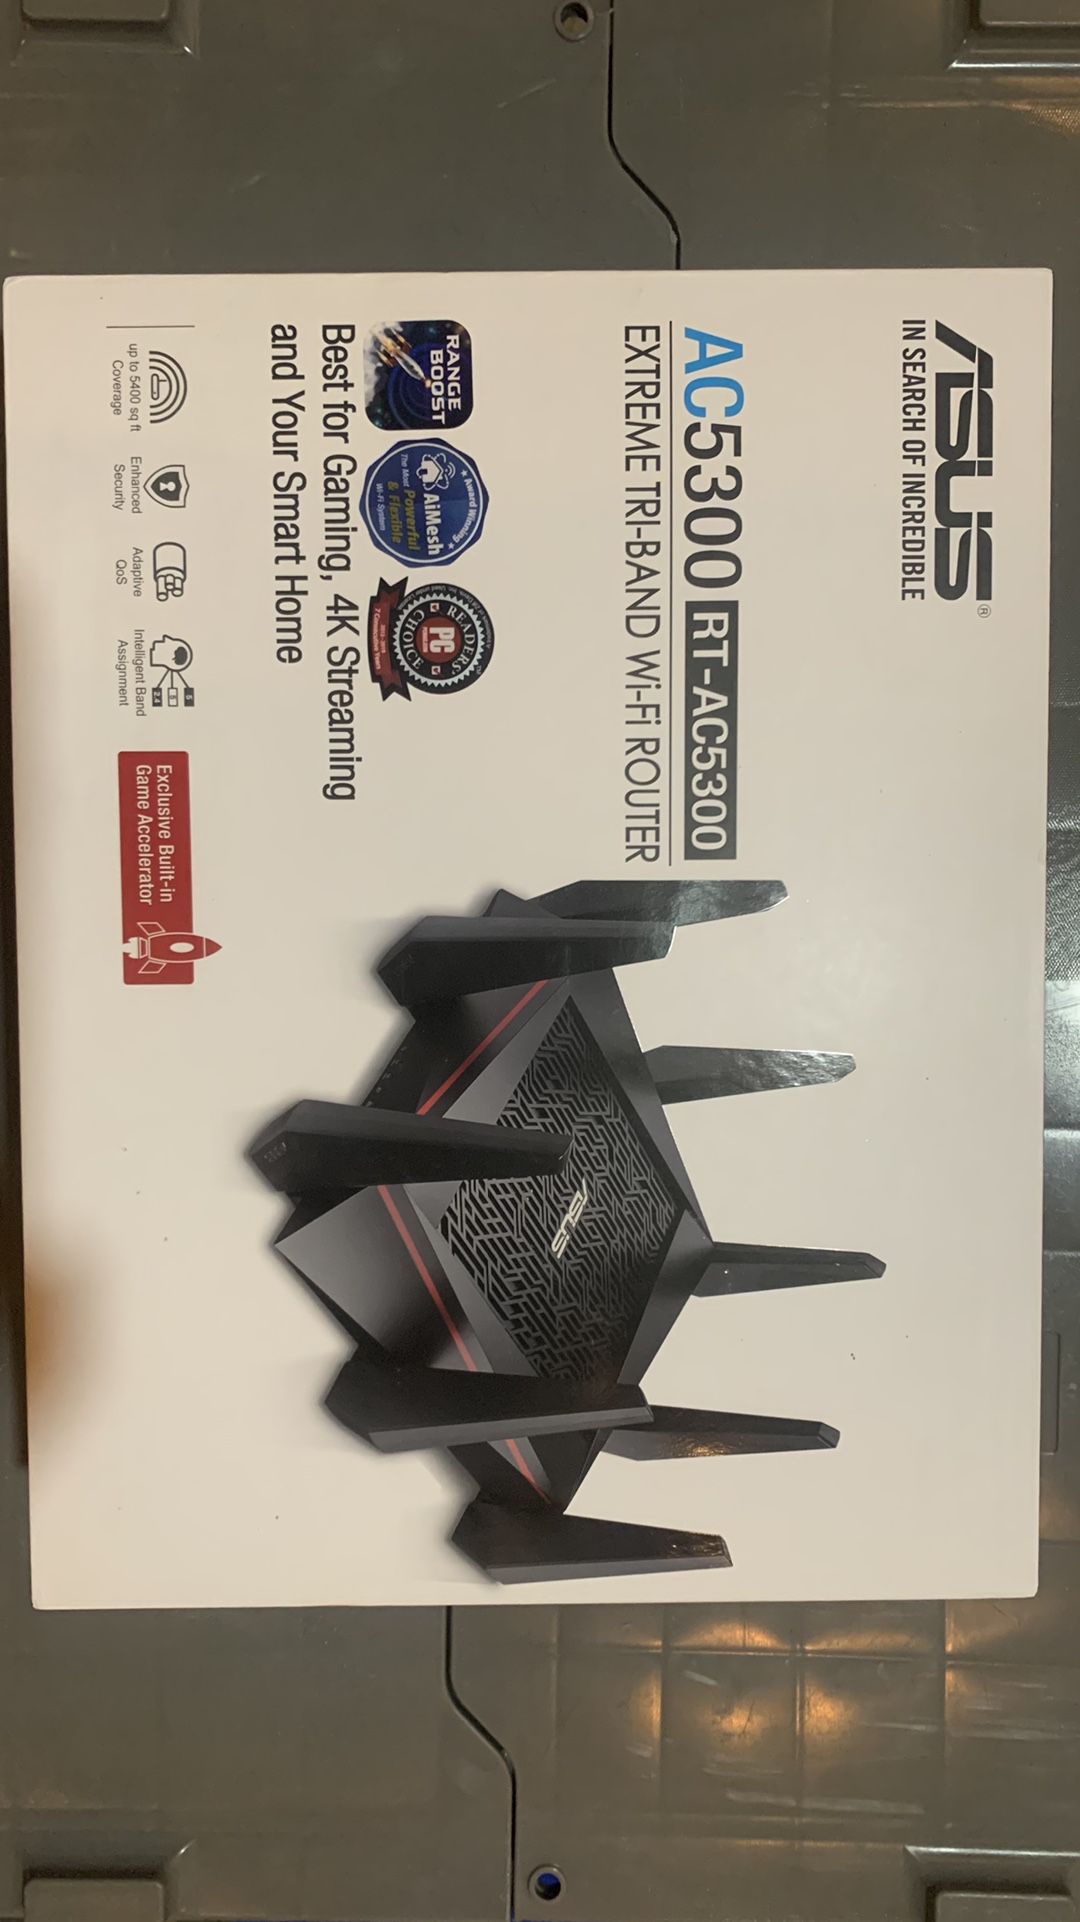 Asus RT-AC5300 Tri-Band WiFi Router 